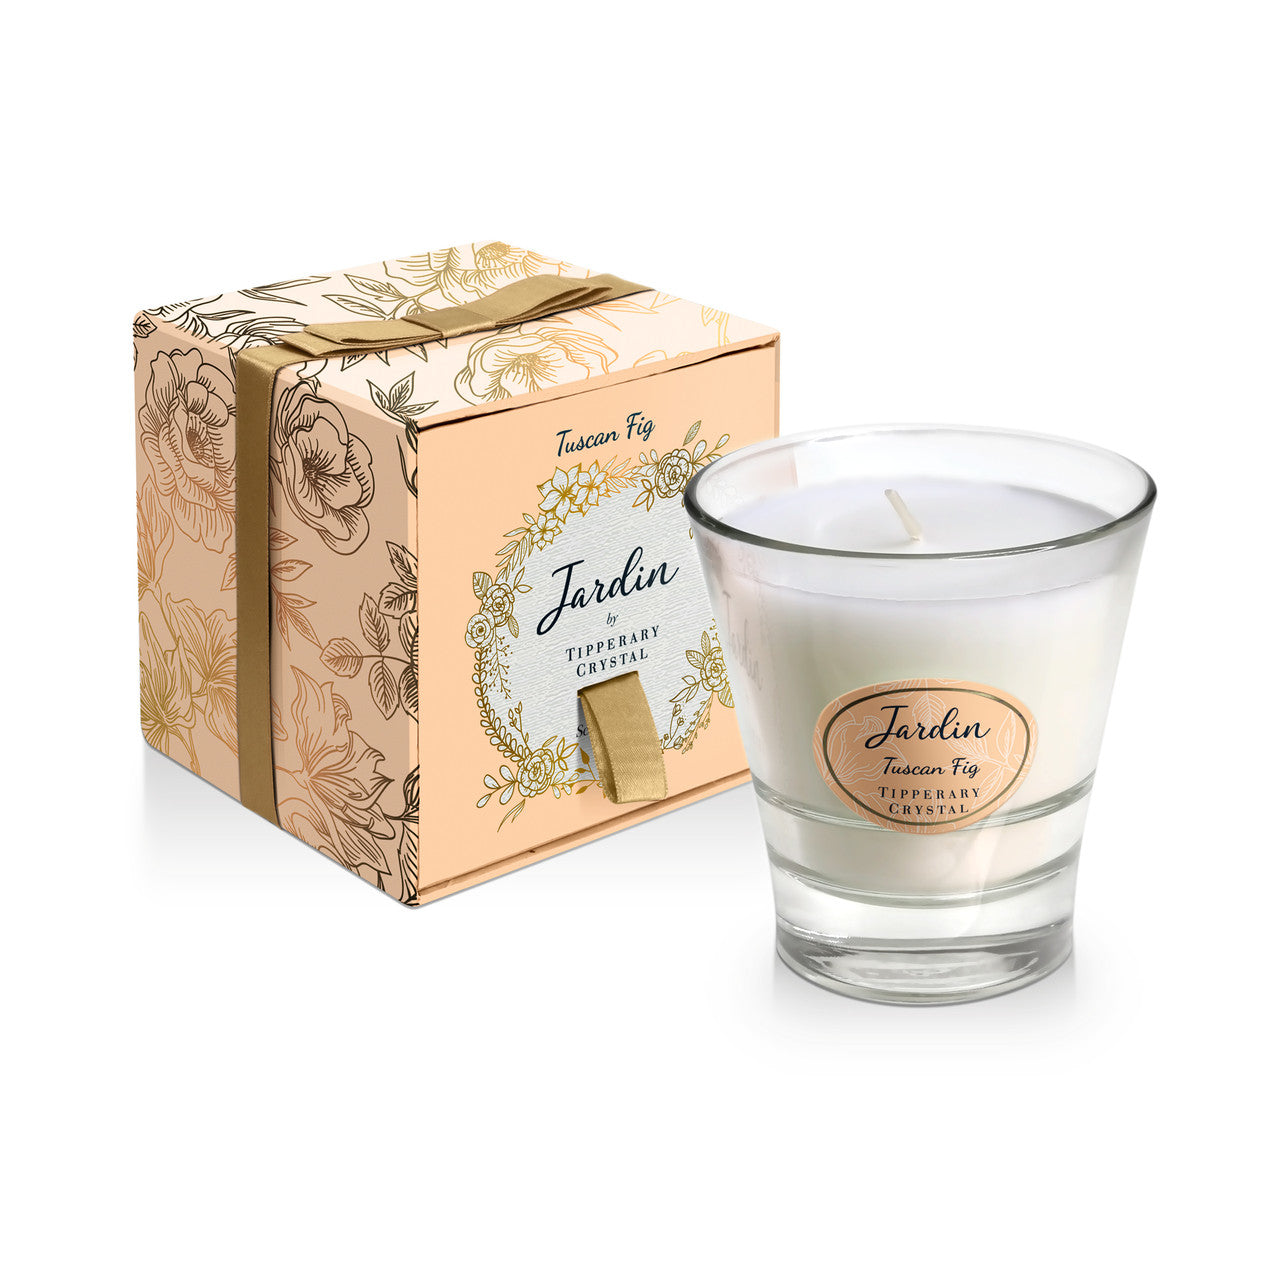 The new Jardin Candle Collection from Tipperary Crystal.  Our luxurious range of fragranced candles are hand poured and hand finished using a natural blend of wax and a lead-free cotton braided wick to ensure a clean, toxin-free burn in your home. Each fragrance is made using the essence of essential oils and has a maximum of 40-45 hours burn time.